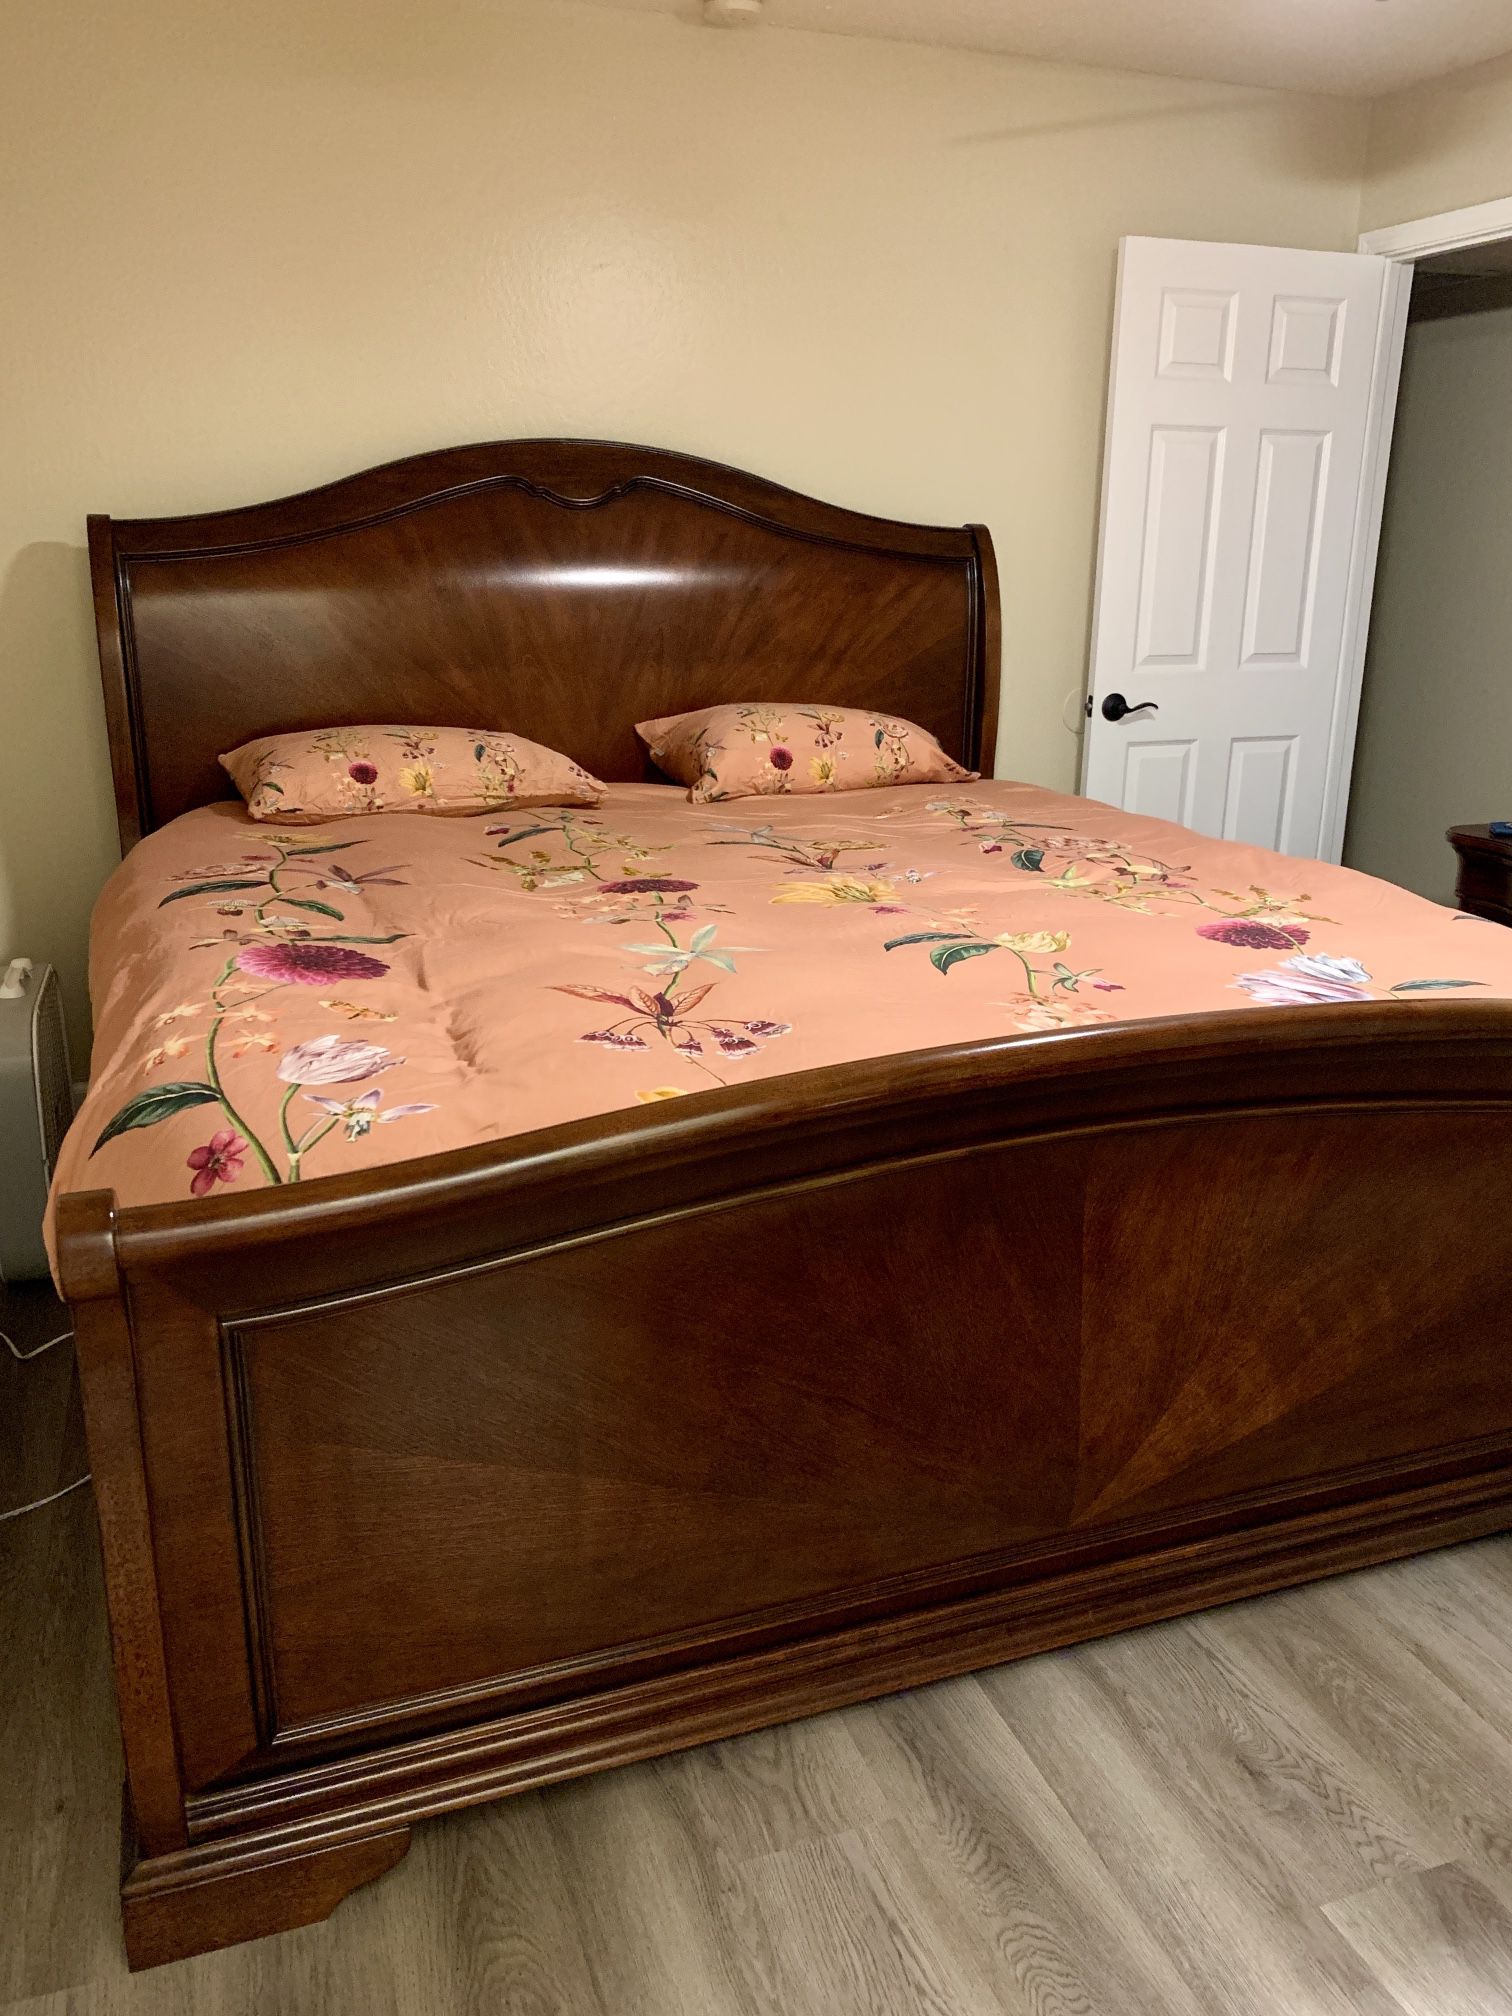 King Size Sleigh Bed frame And Nightstand 